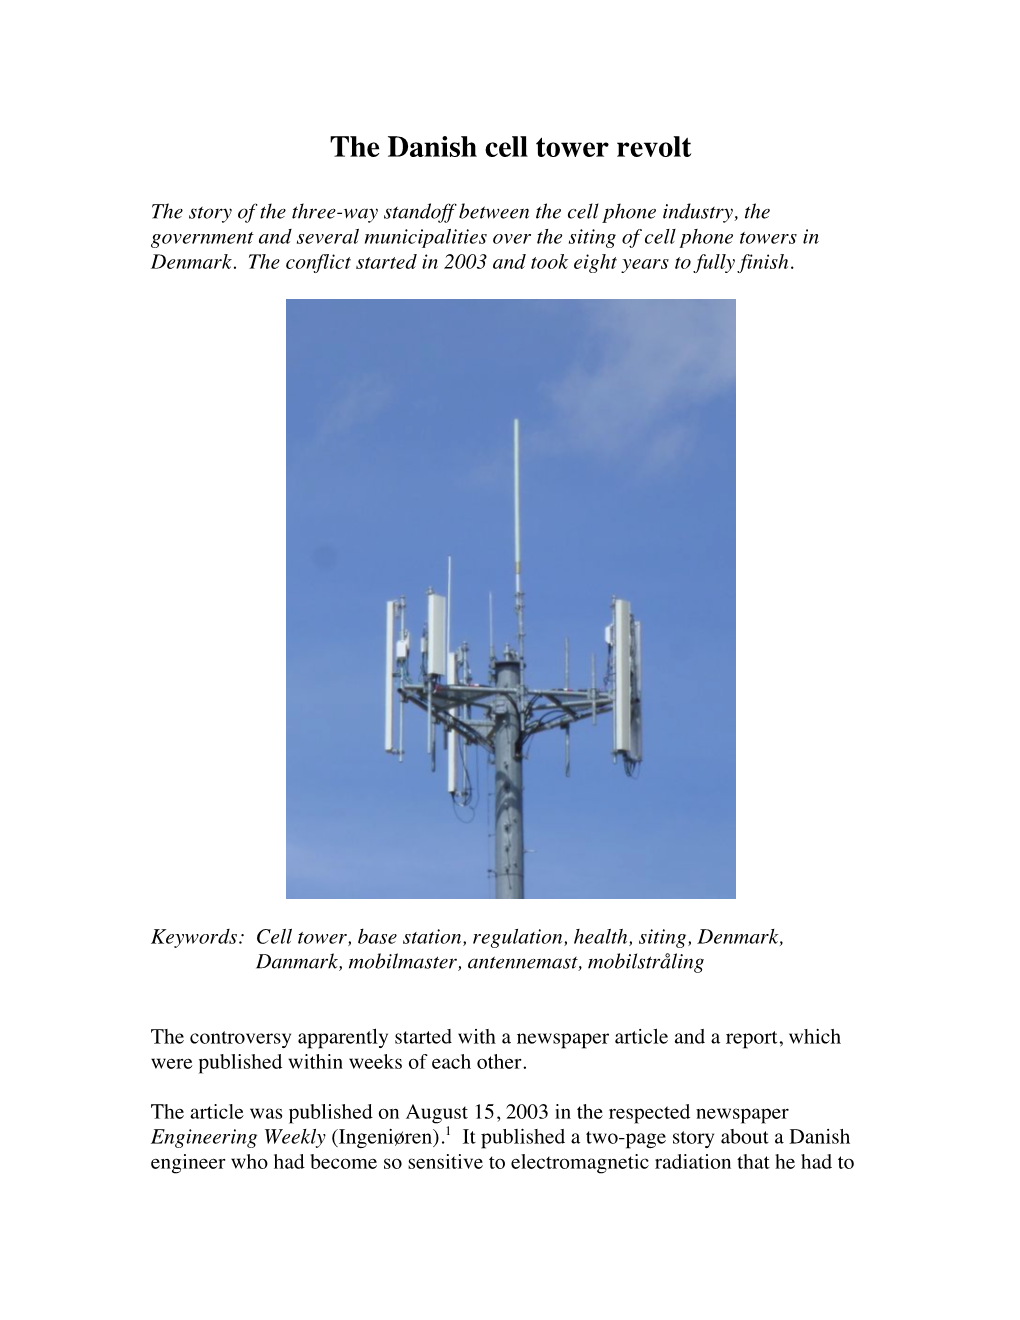 The Danish Cell Tower Revolt